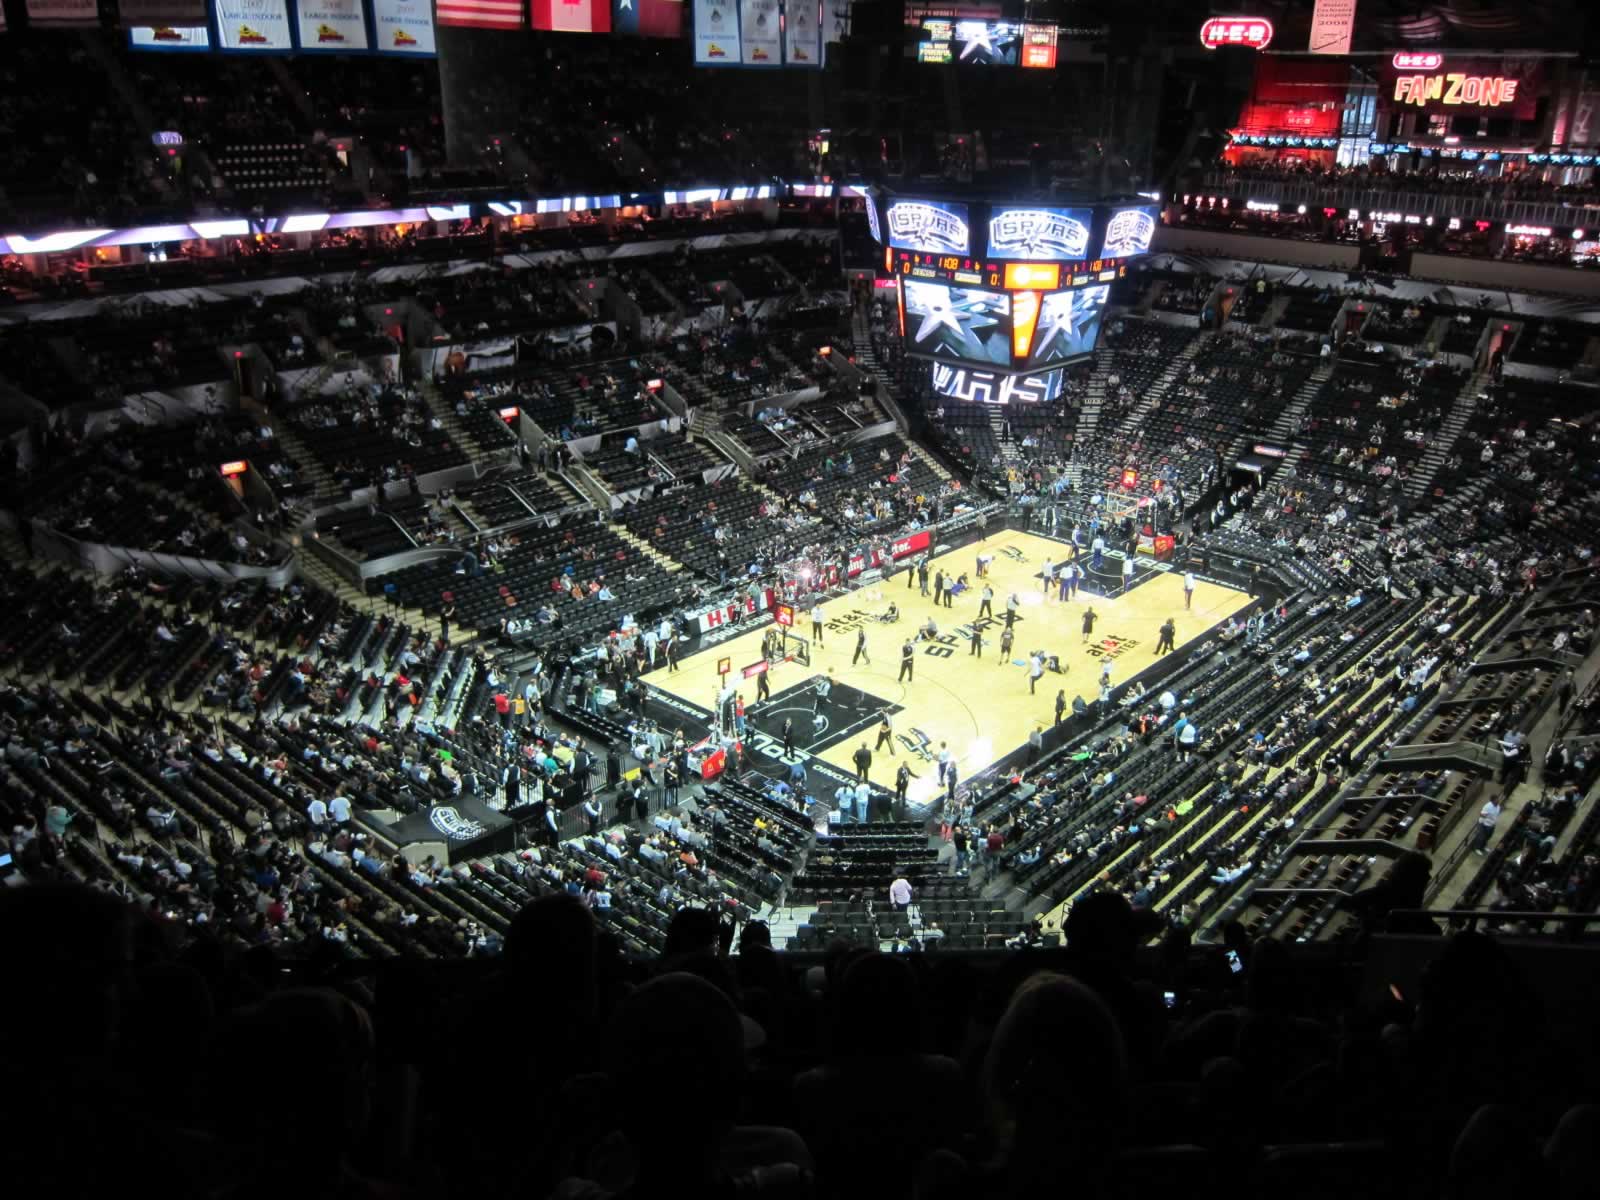 section 229, row 12 seat view  for basketball - at&t center